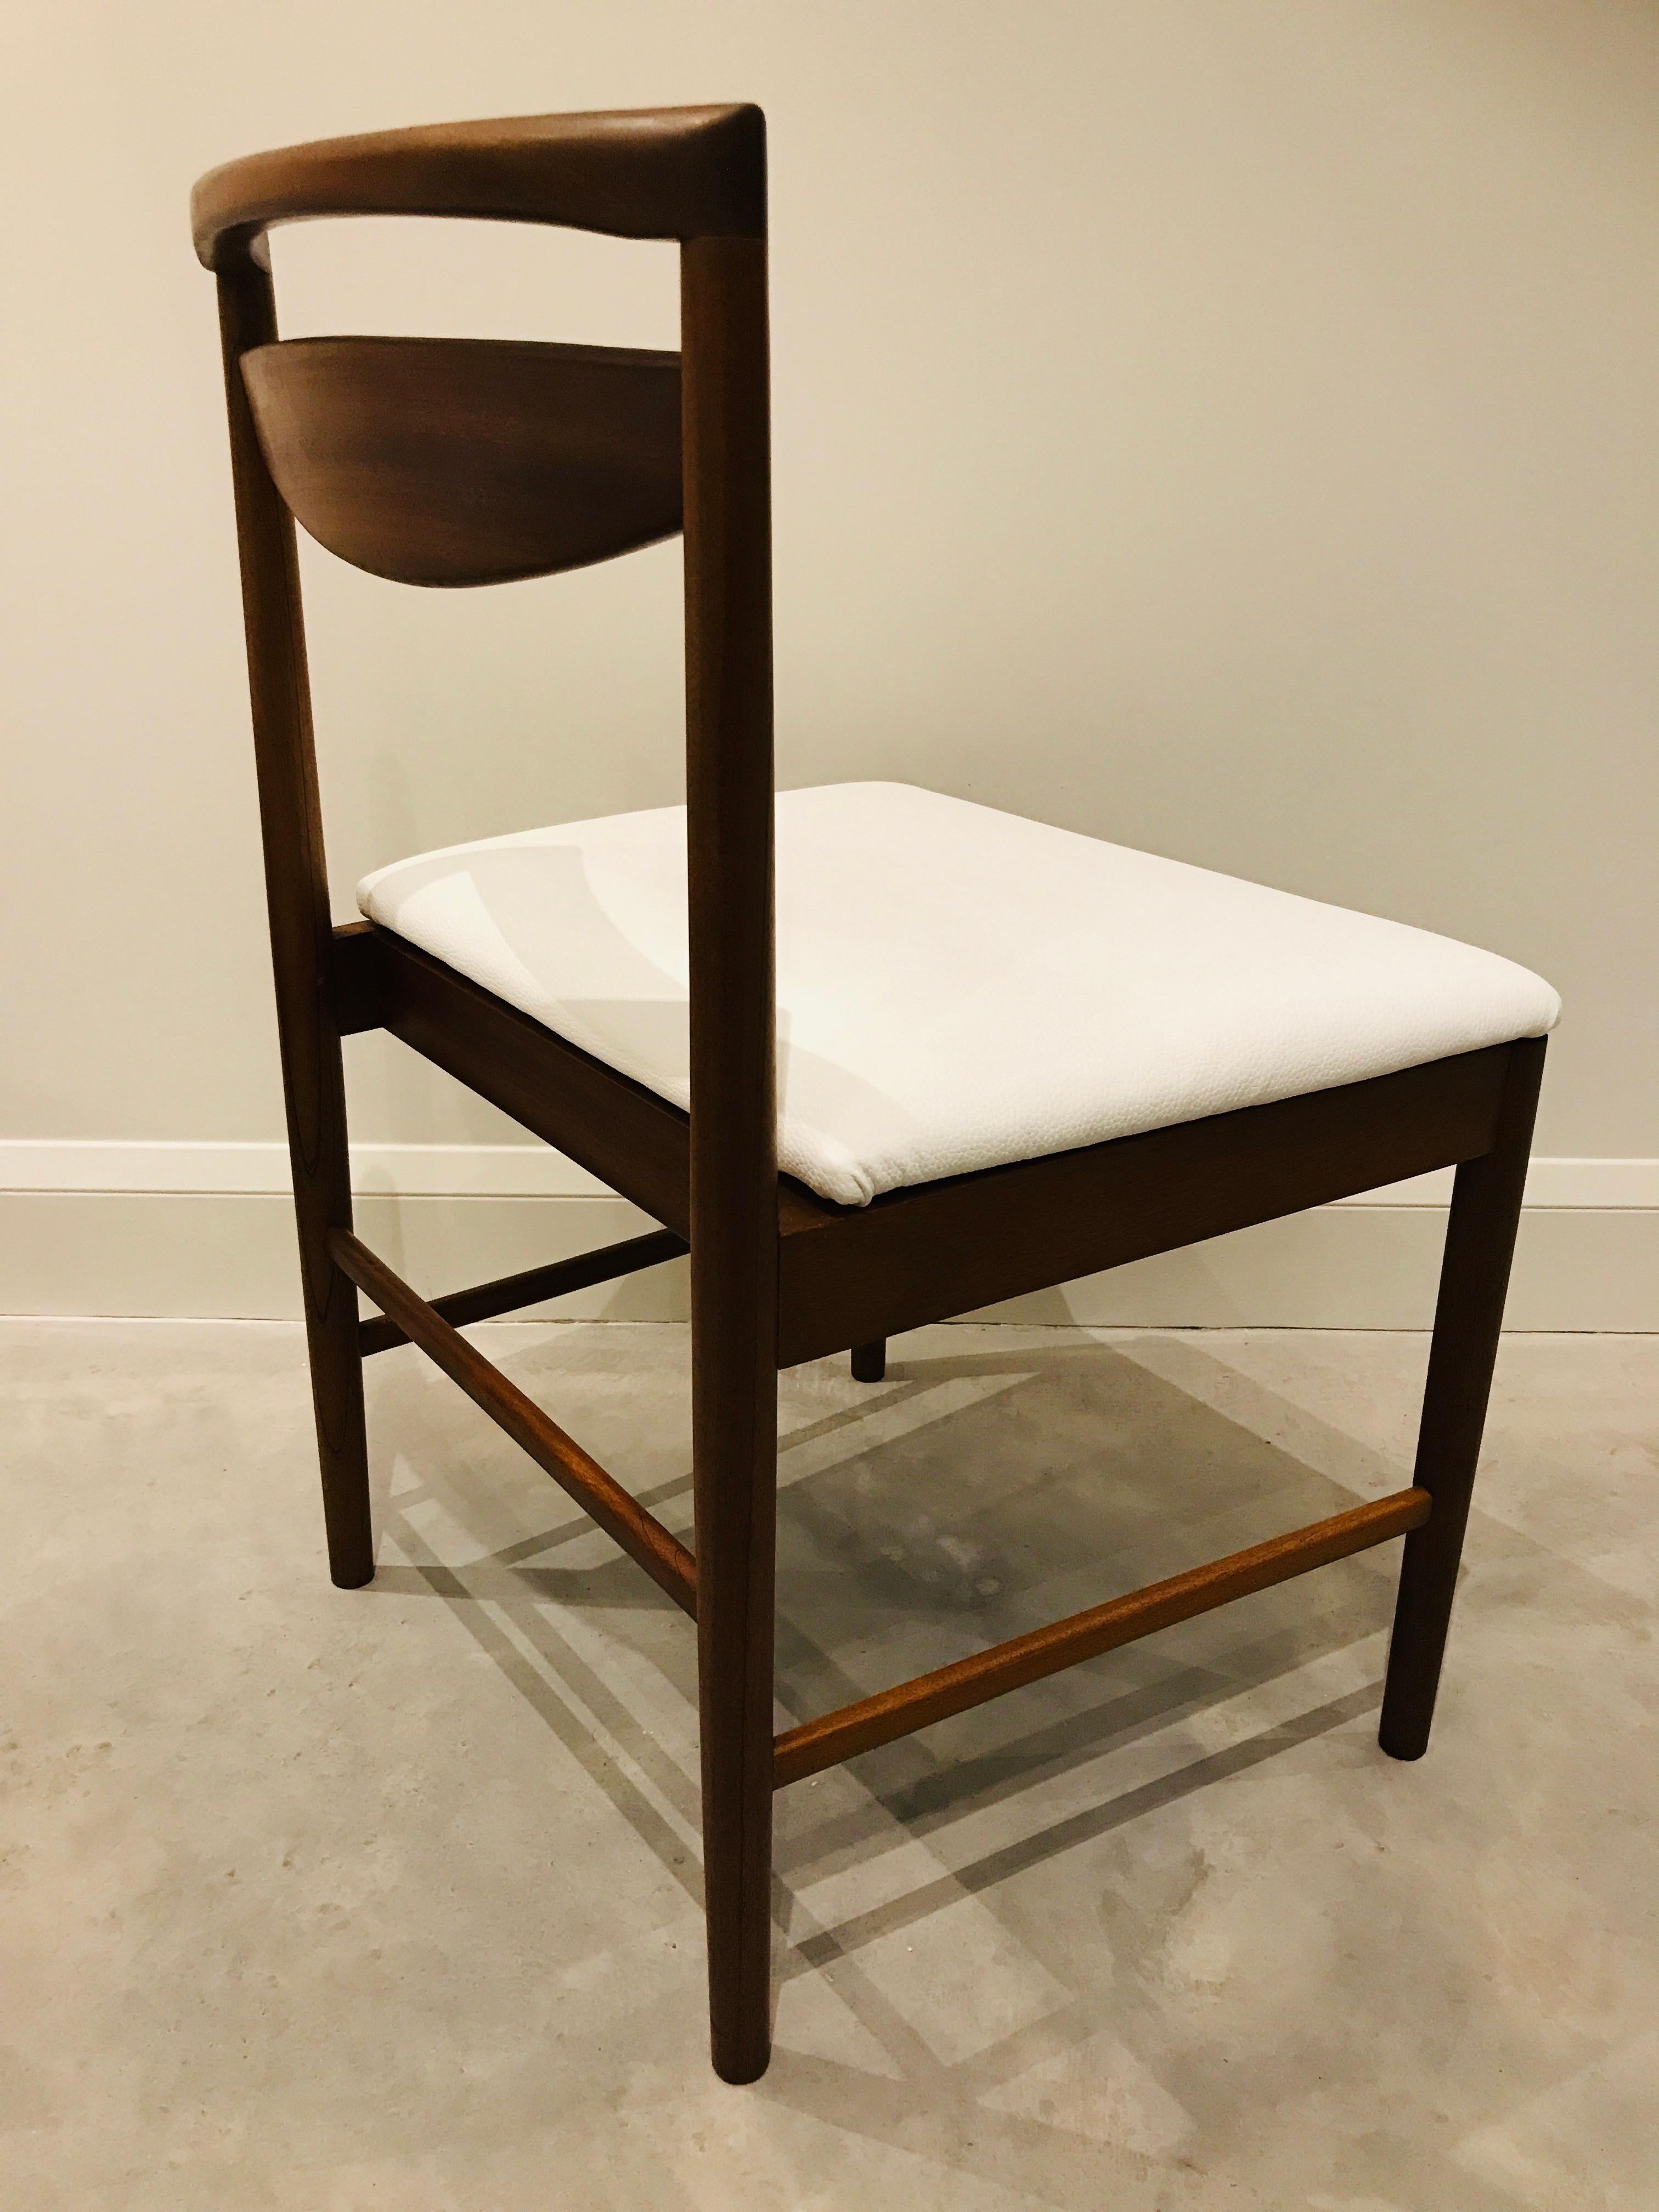 1970 Vintage Teak McIntosh Retro Dining Chairs Upholstered in White Leather For Sale 6